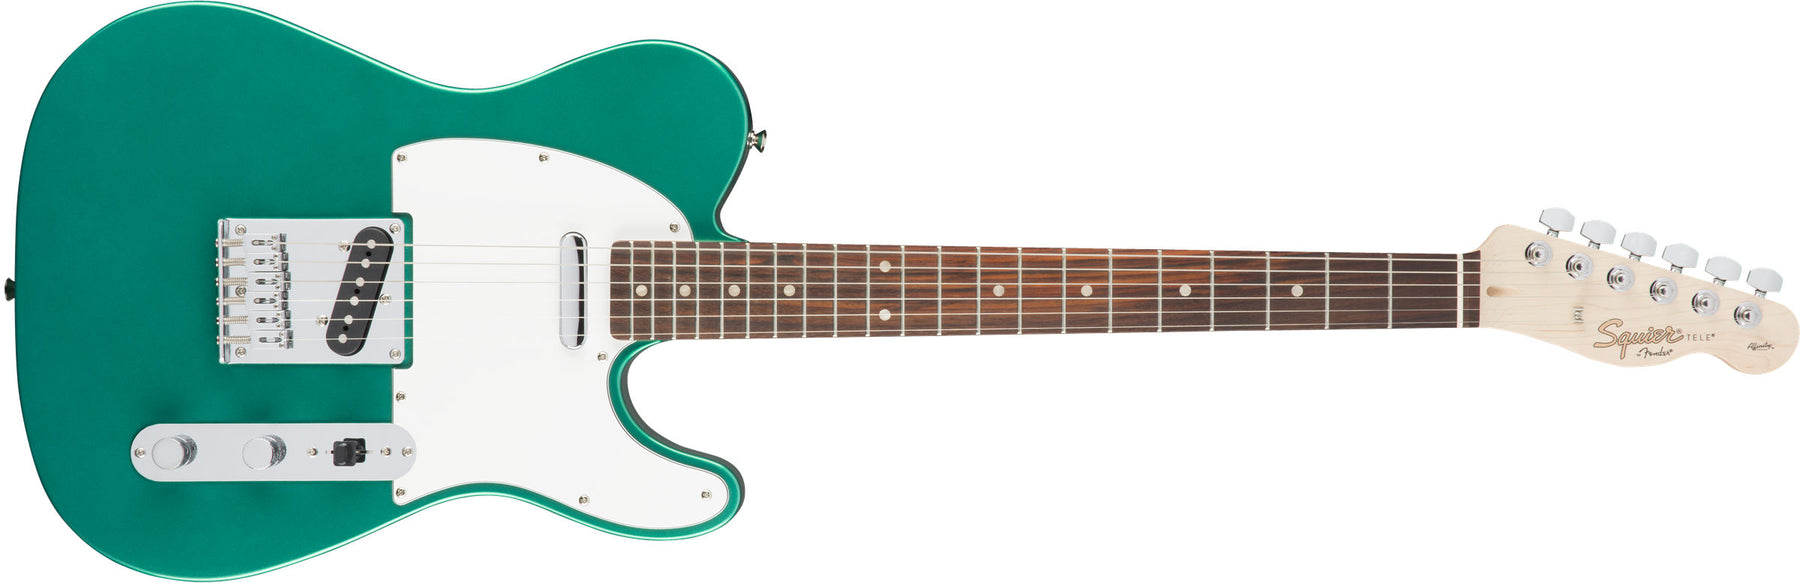 The Squier Affinity Telecaster By Fender Reviewed